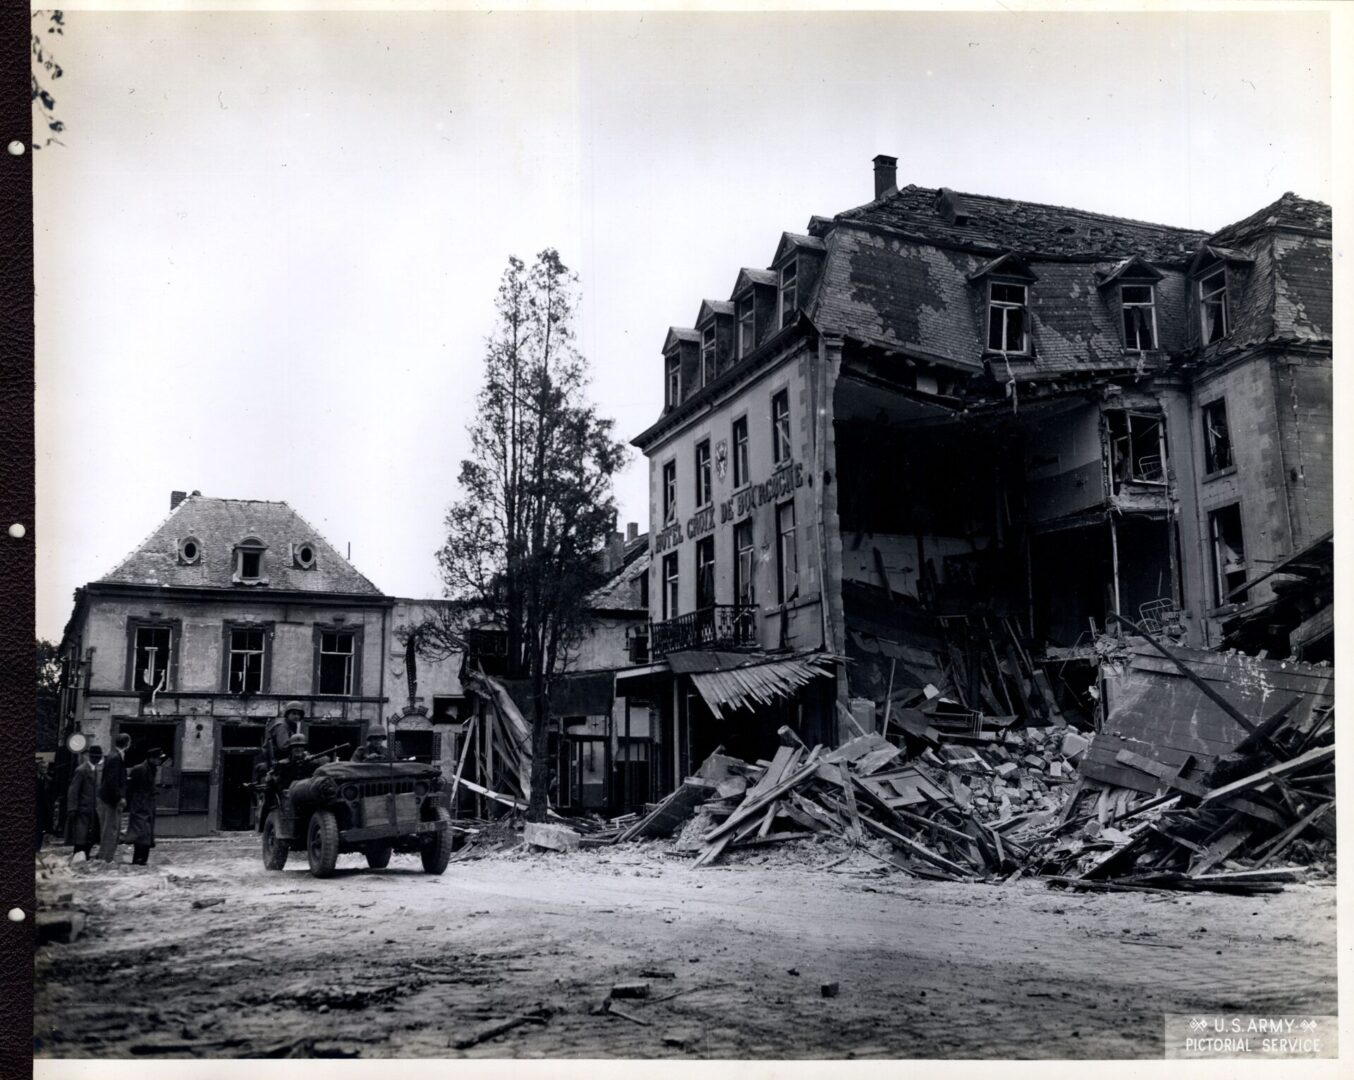 Jeep passing through wrecked town of Vallenburg in Holland